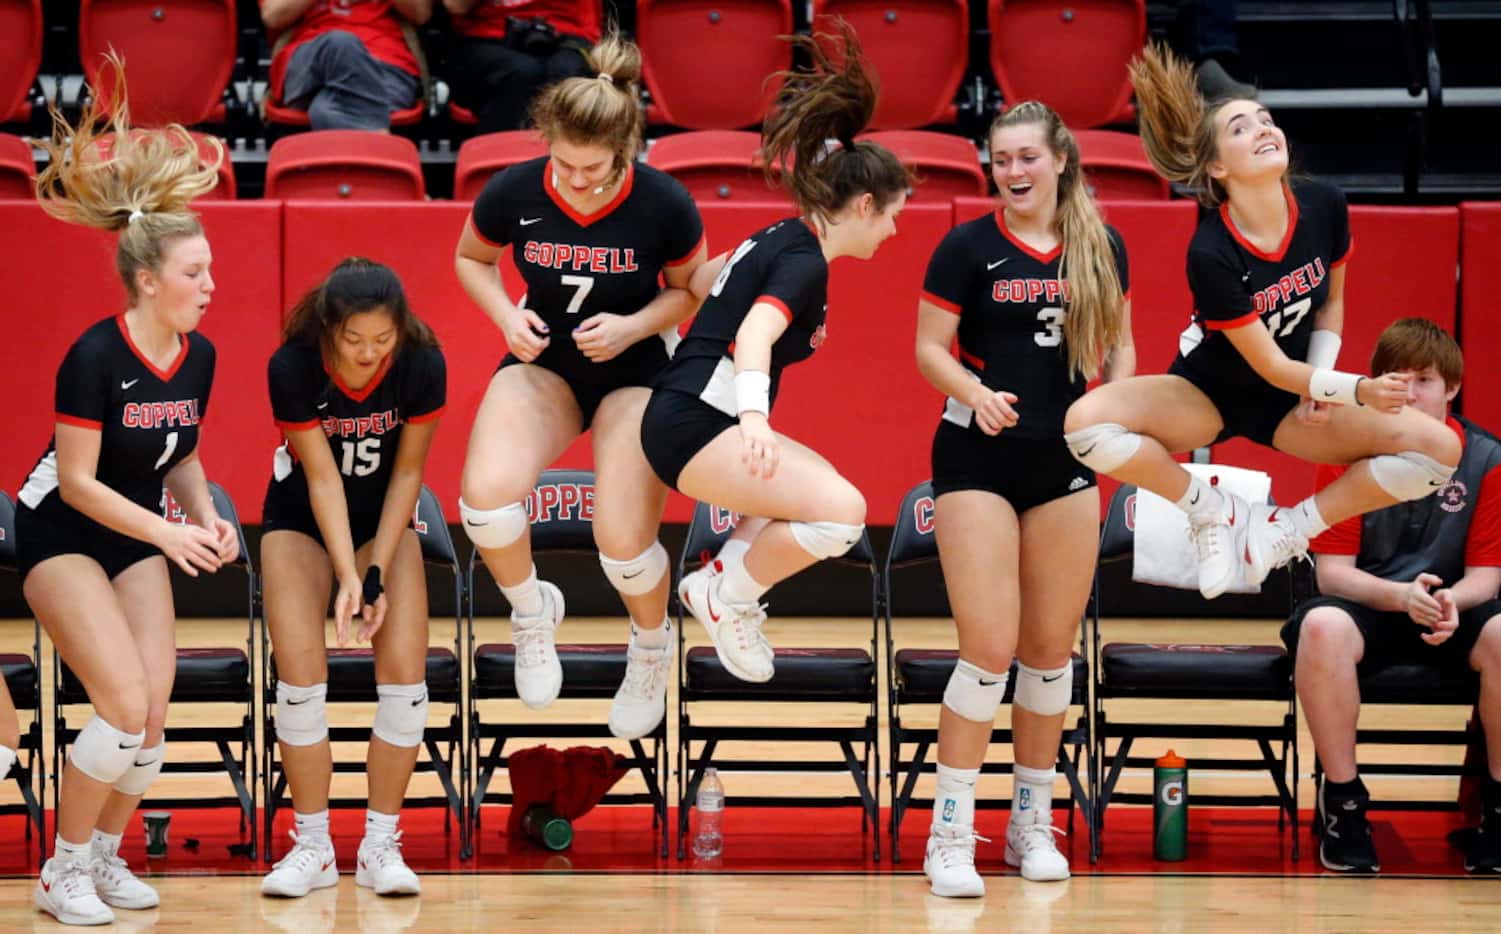 Coppell High senior volleyball player Pierce Woodall (7) joins her teammates in a group...